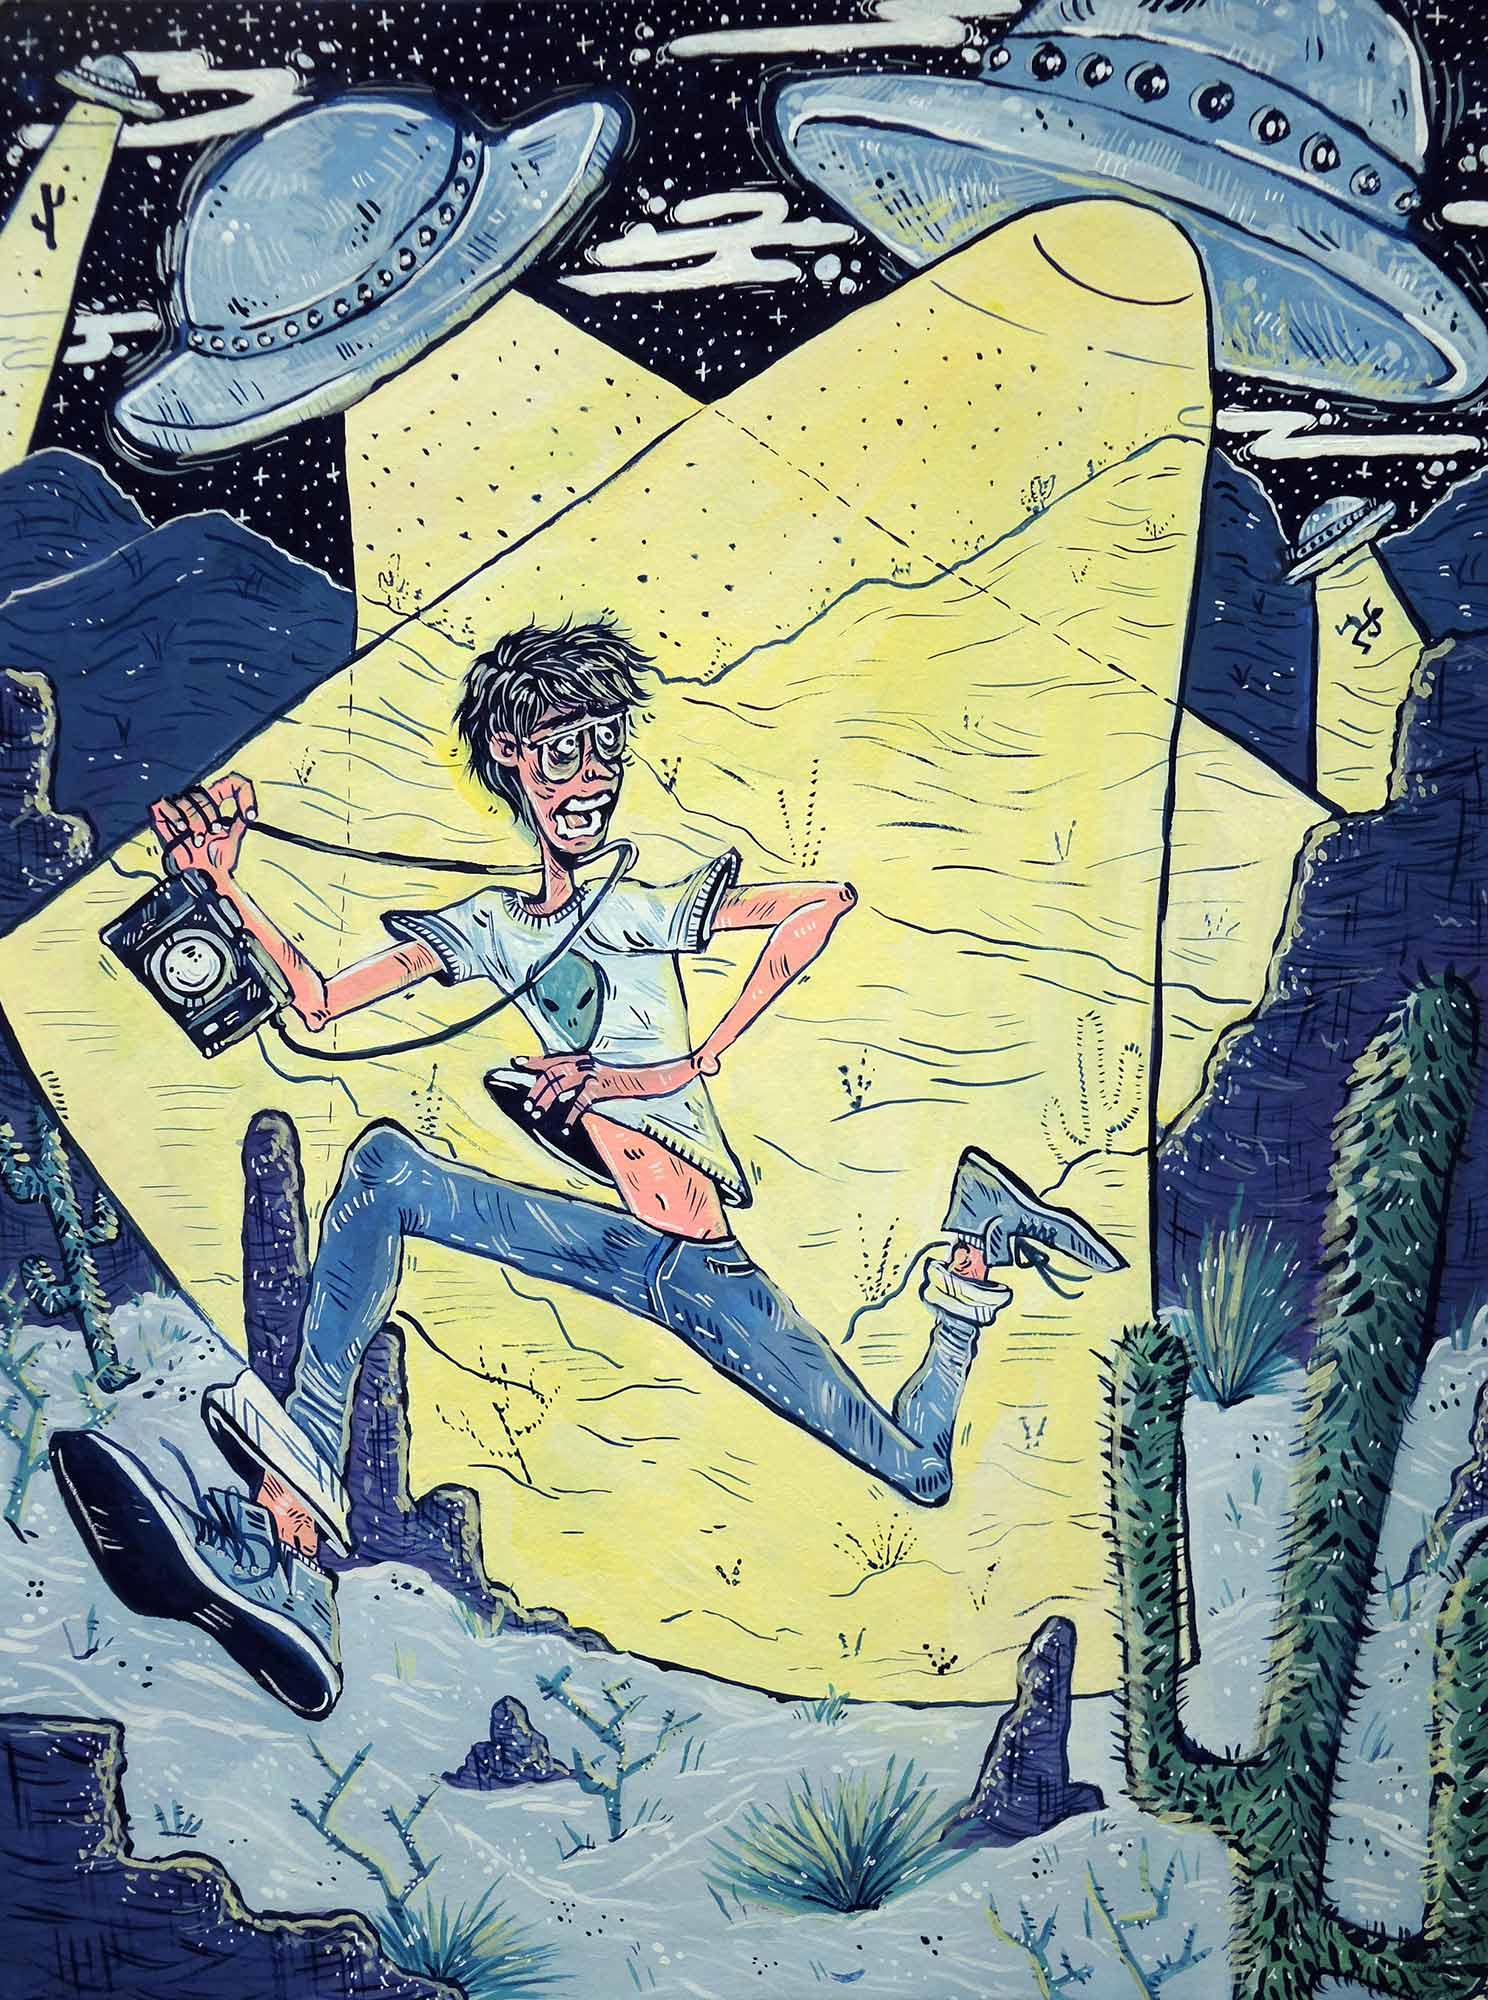 An illustration of a young person running from UFOs in the night sky